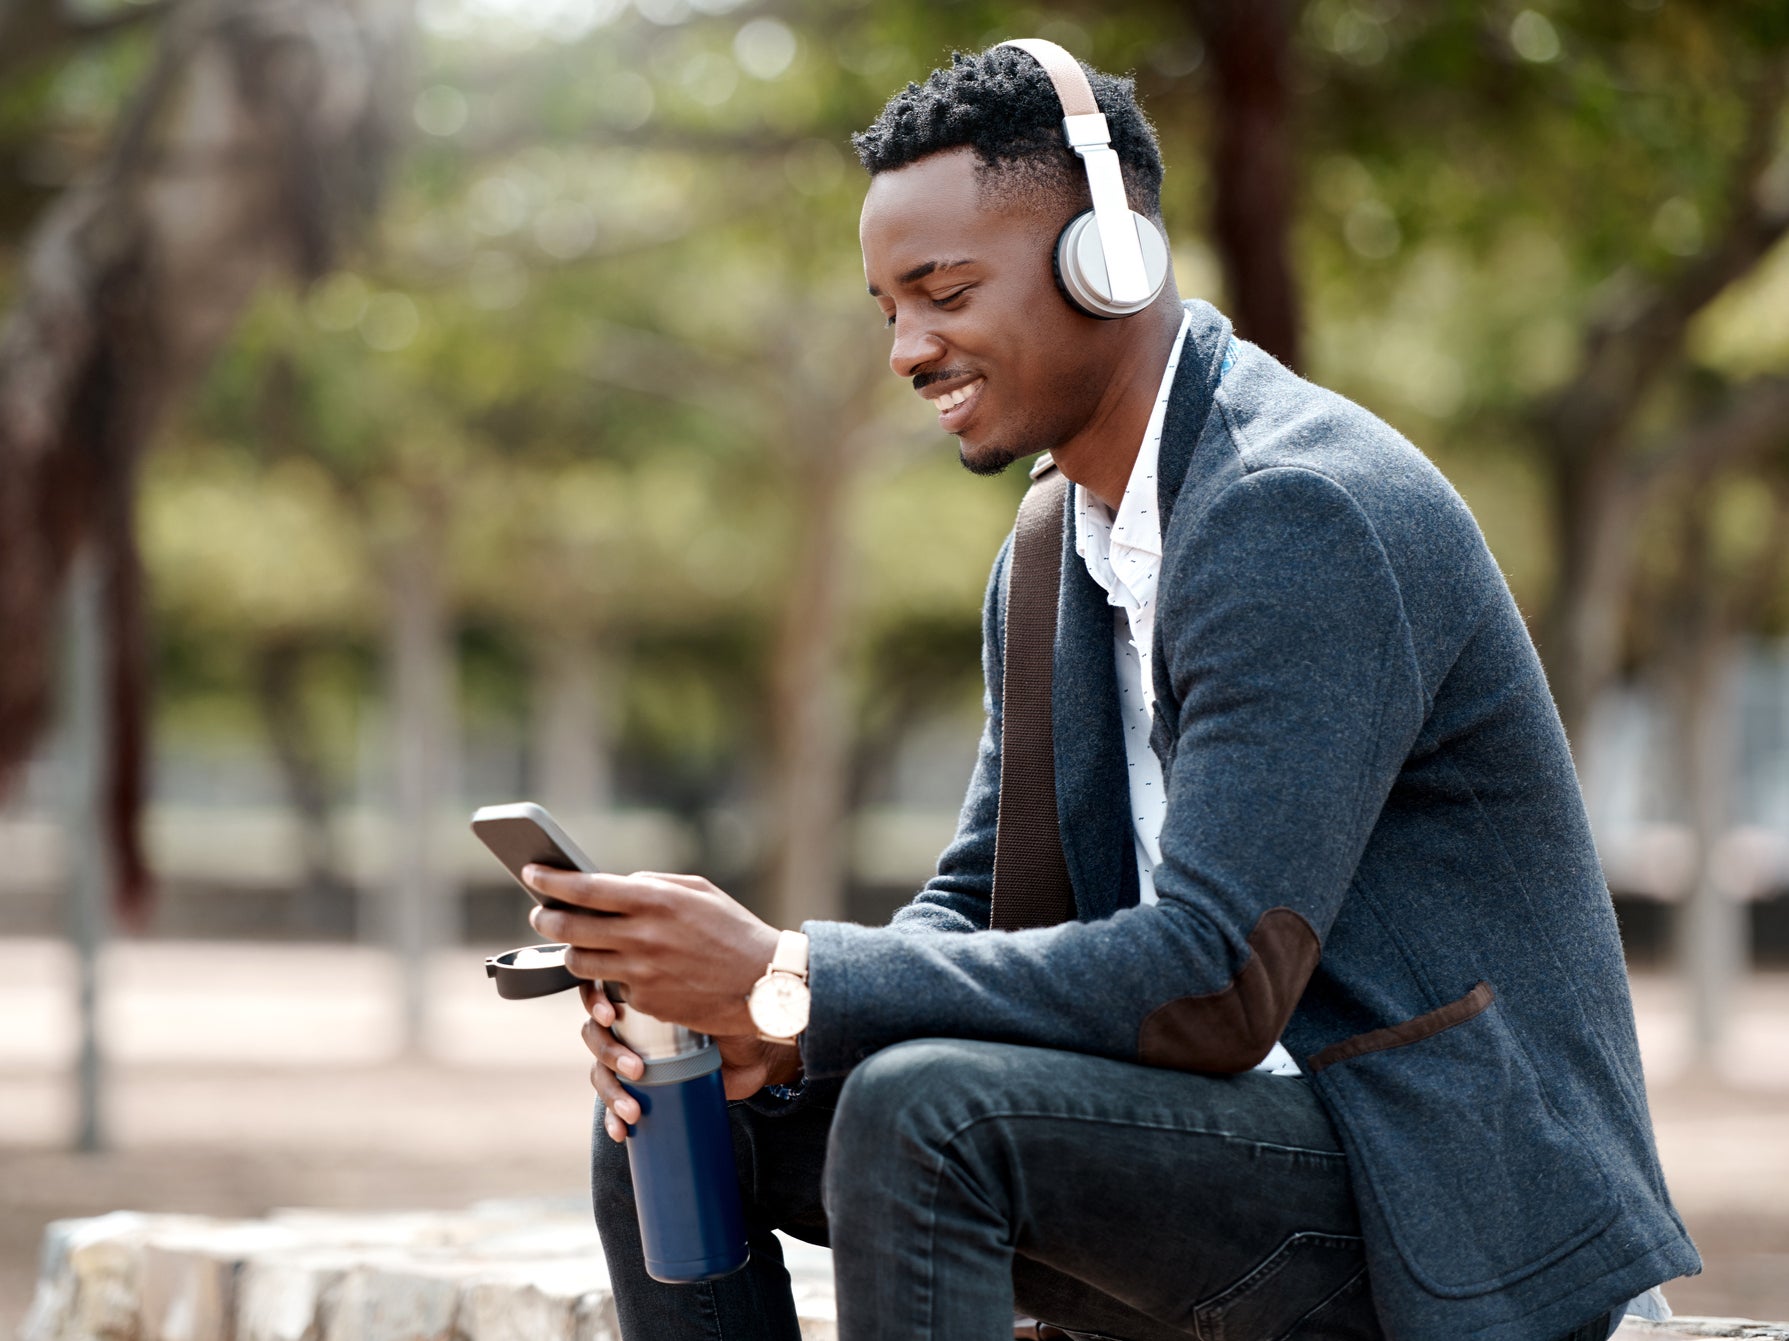 Those who listened to a discussion about homelessness through headphones showed greater empathy